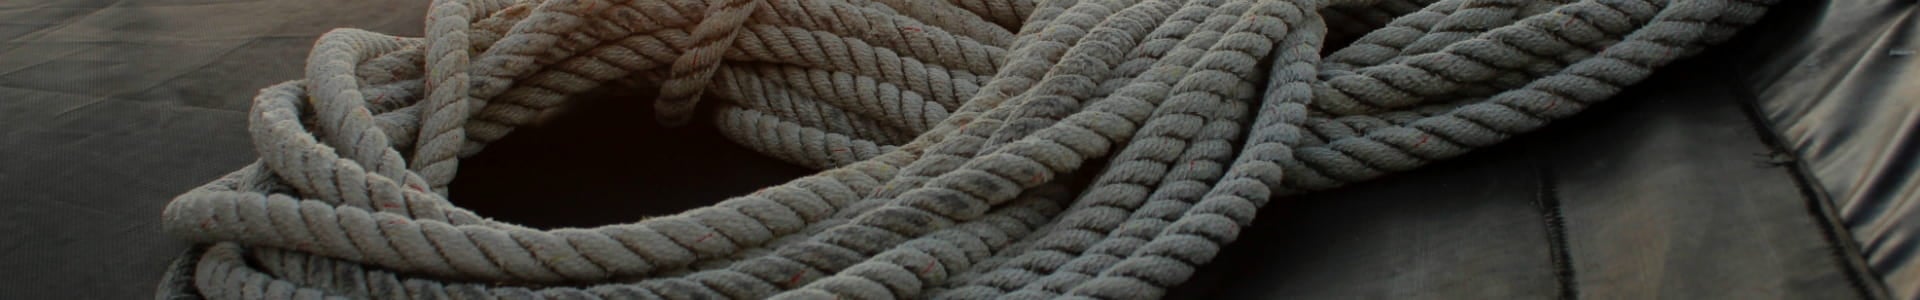 Ropes on a boat deck